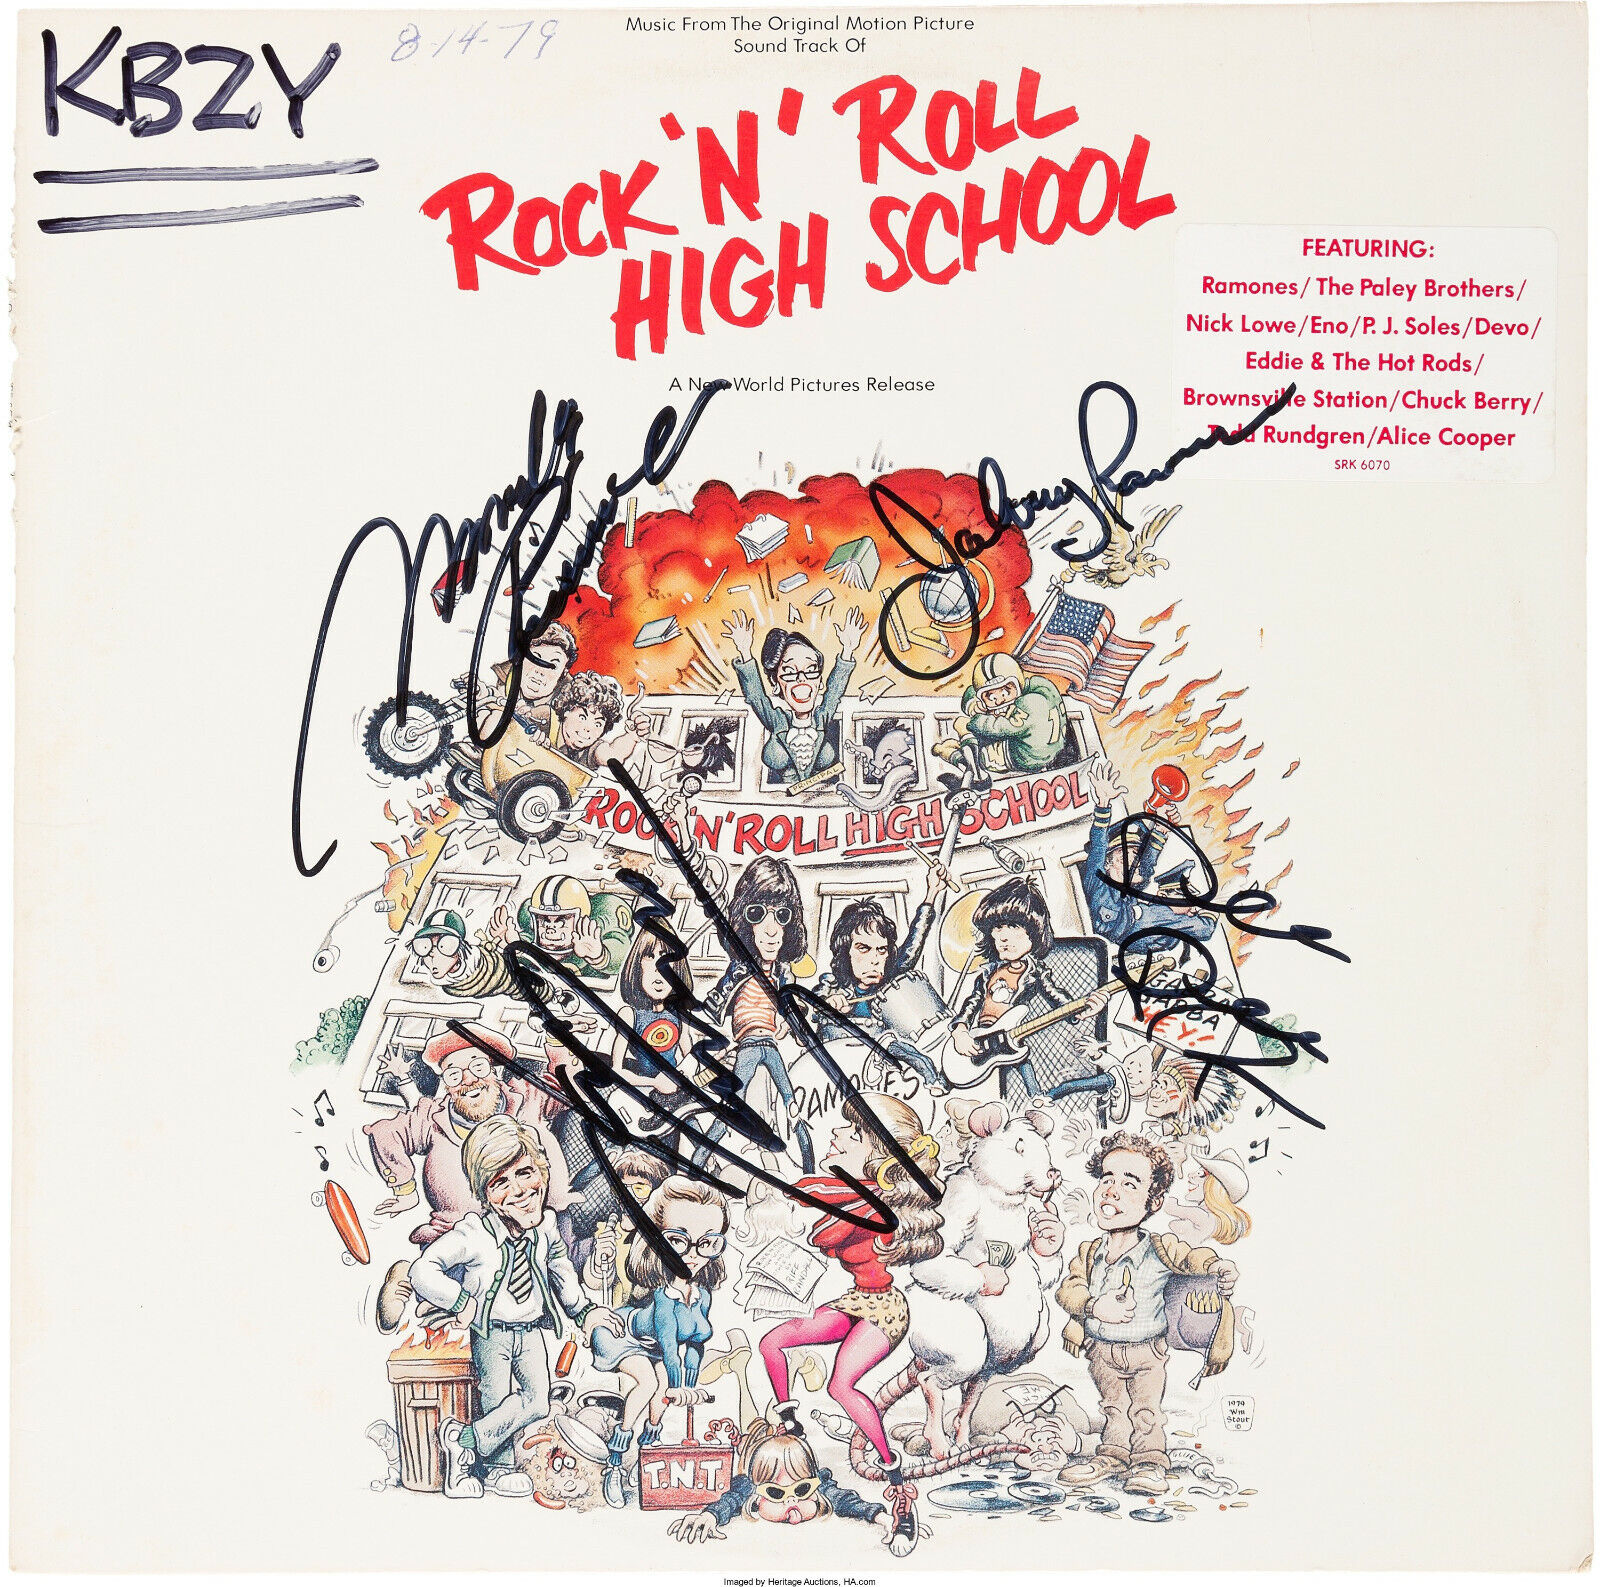 THE RAMONES Signed 'Rock N Roll High School' Photo Poster paintinggraph Punk Rock Band preprint